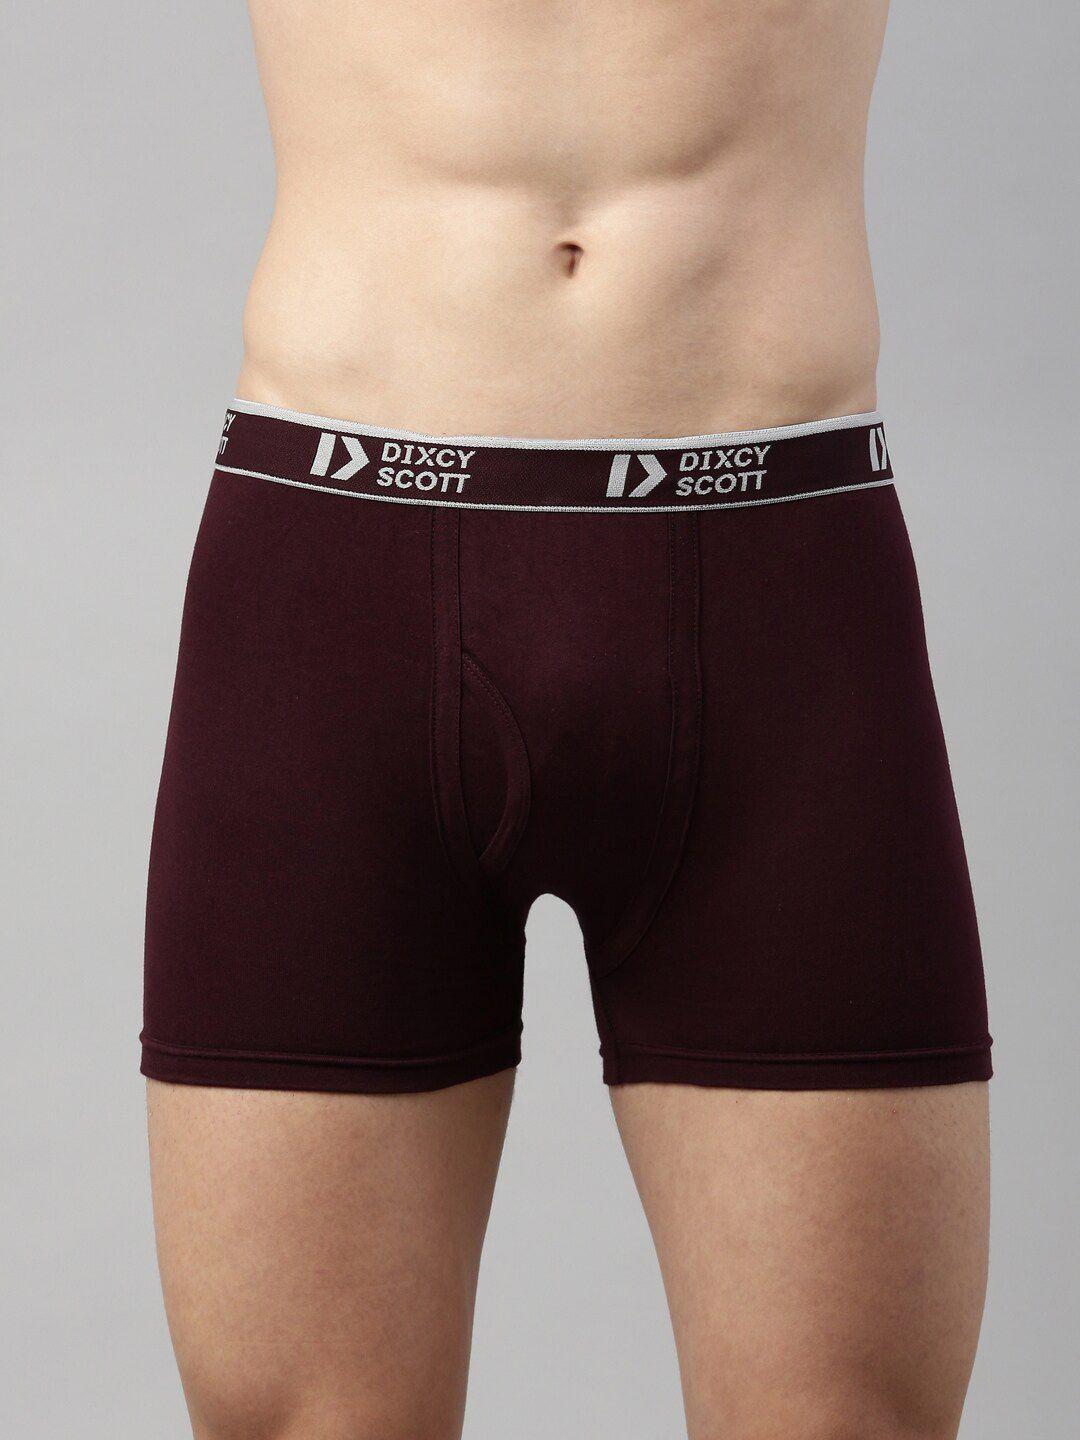 dixcy scott men burgundy solid pure cotton trunk dso-cross trunk-p1